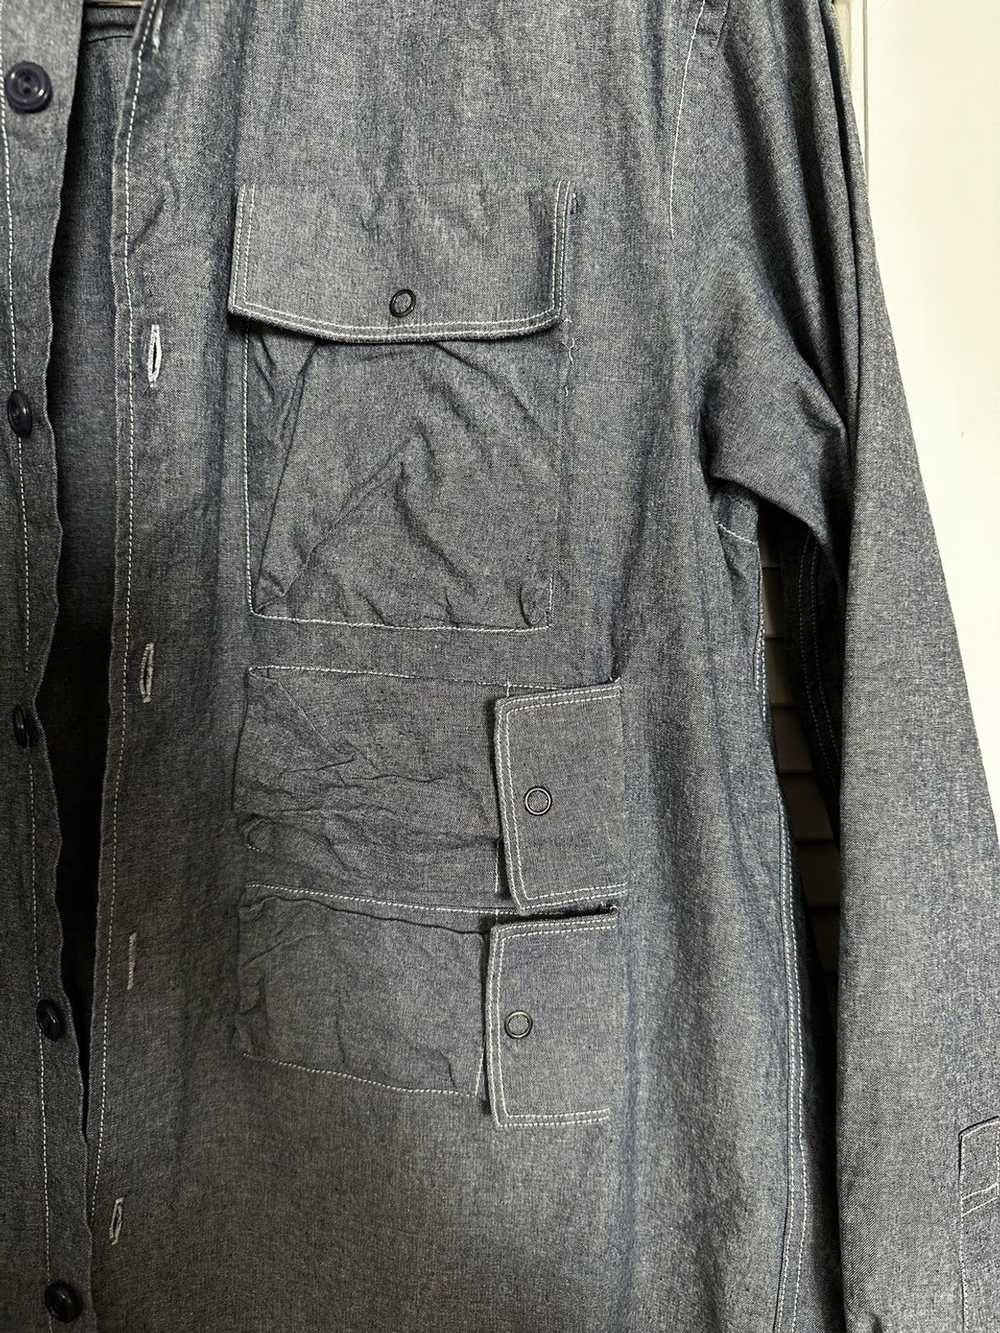 Eastlogue Utility Field Shirt Blue Chambray Size M - image 4